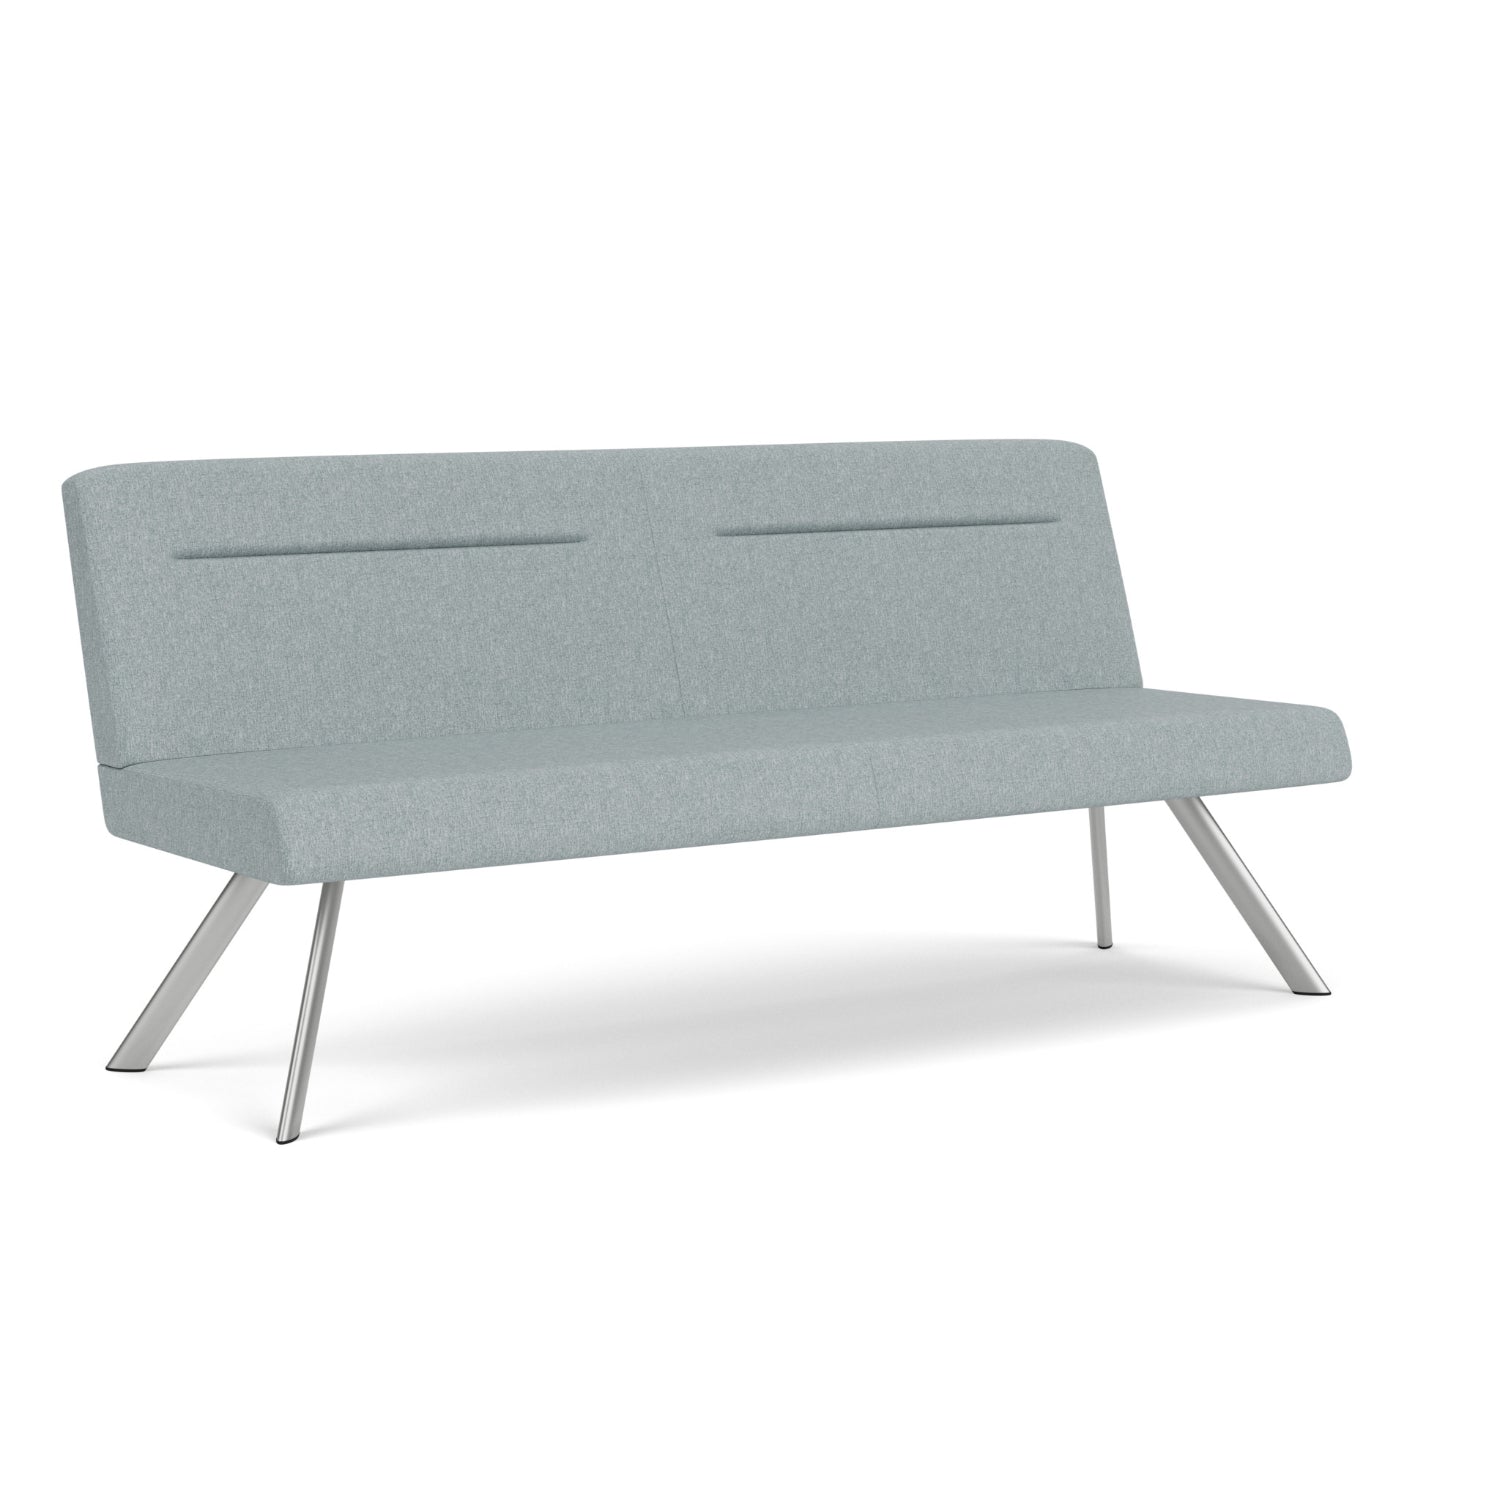 Willow Collection Reception Seating, Armless Sofa, Healthcare Vinyl Upholstery, FREE SHIPPING